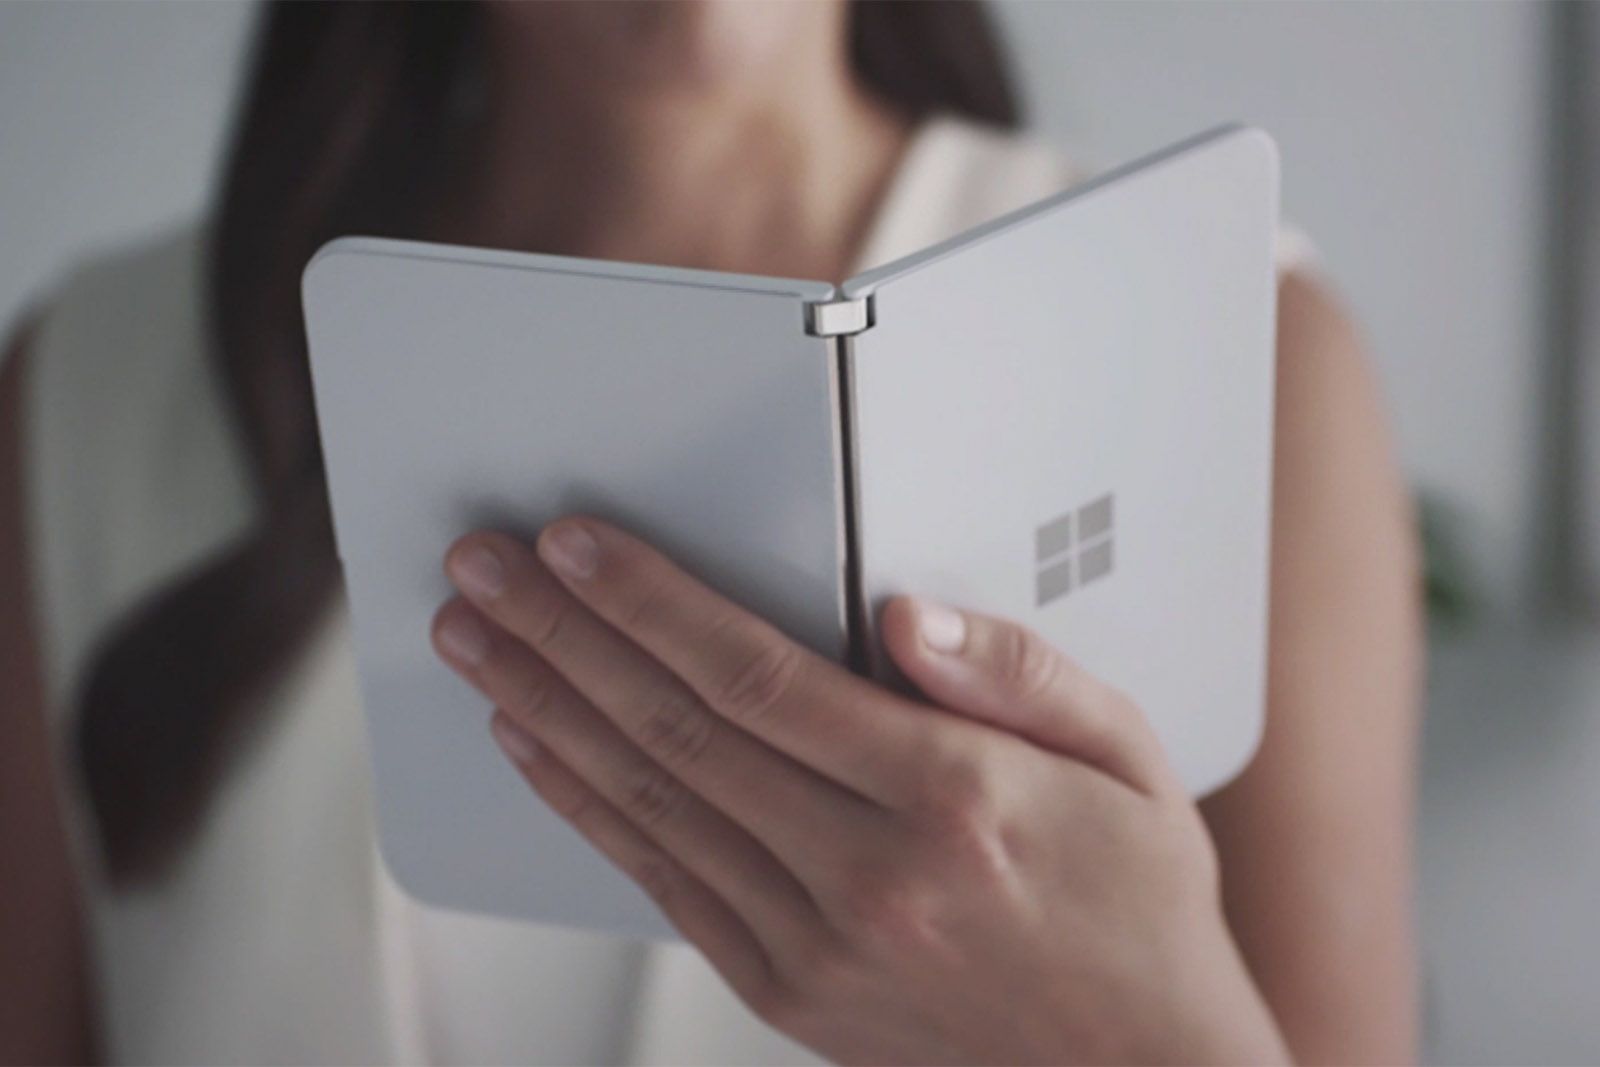 Microsoft's Surface Duo is available through EE in the UK photo 1